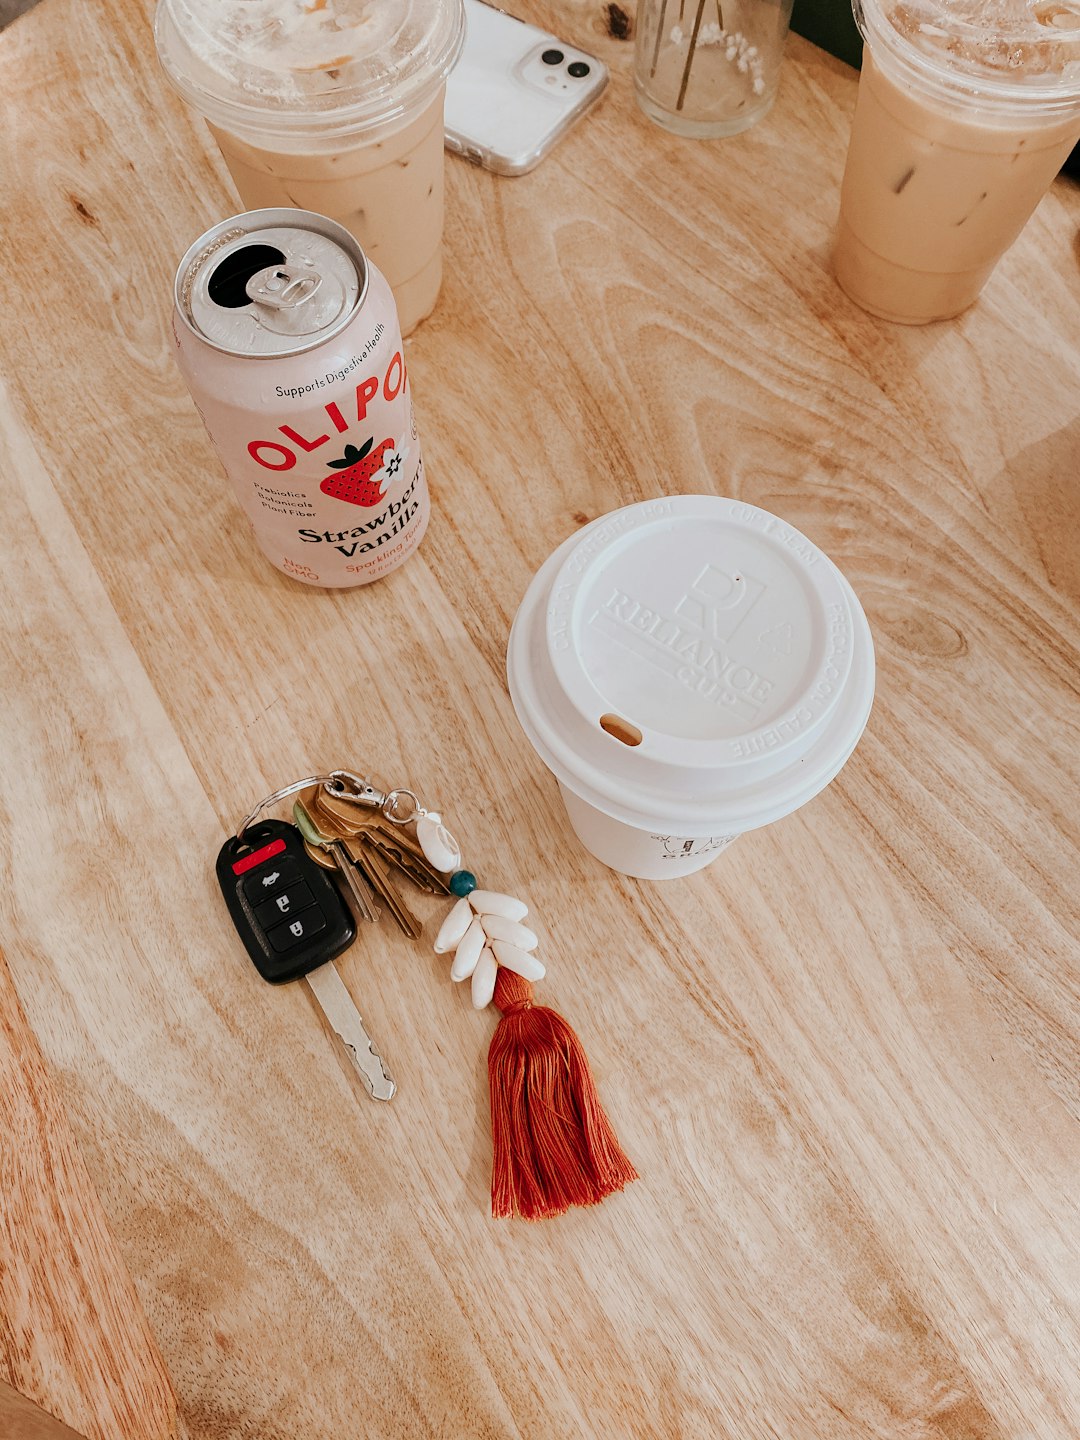 black and red car key beside white disposable cup